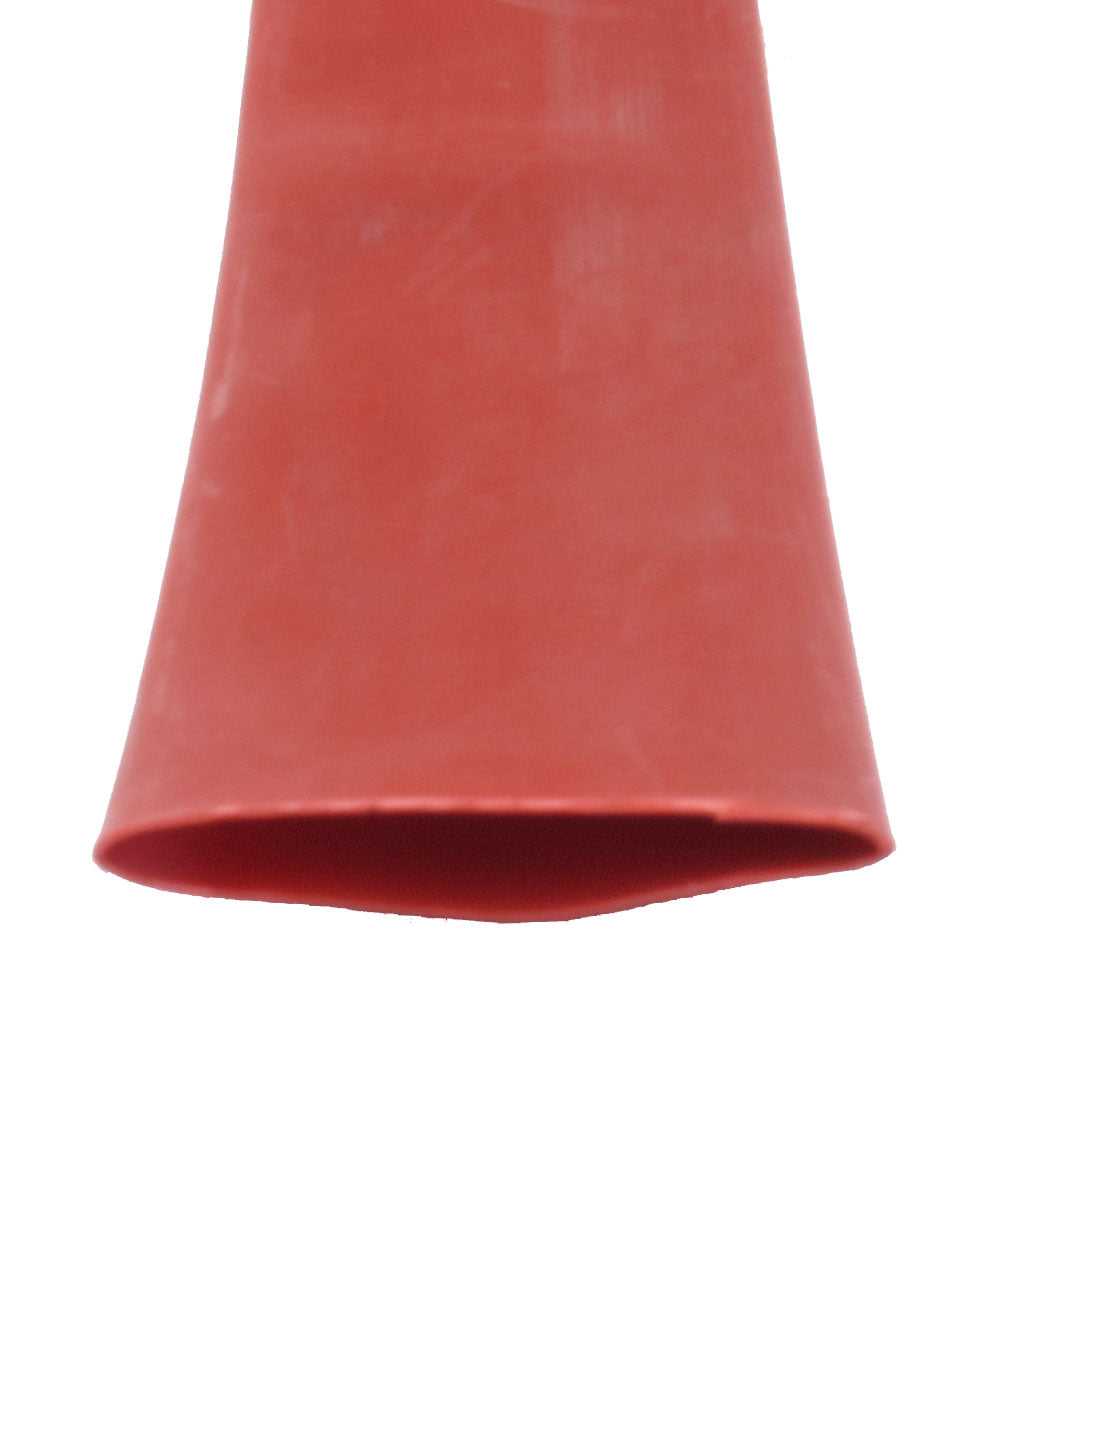 uxcell Uxcell 1M 2:1 High Voltage Red Insulation Bus Bar Heat Shrink Tubing Tube 30mm Diameter